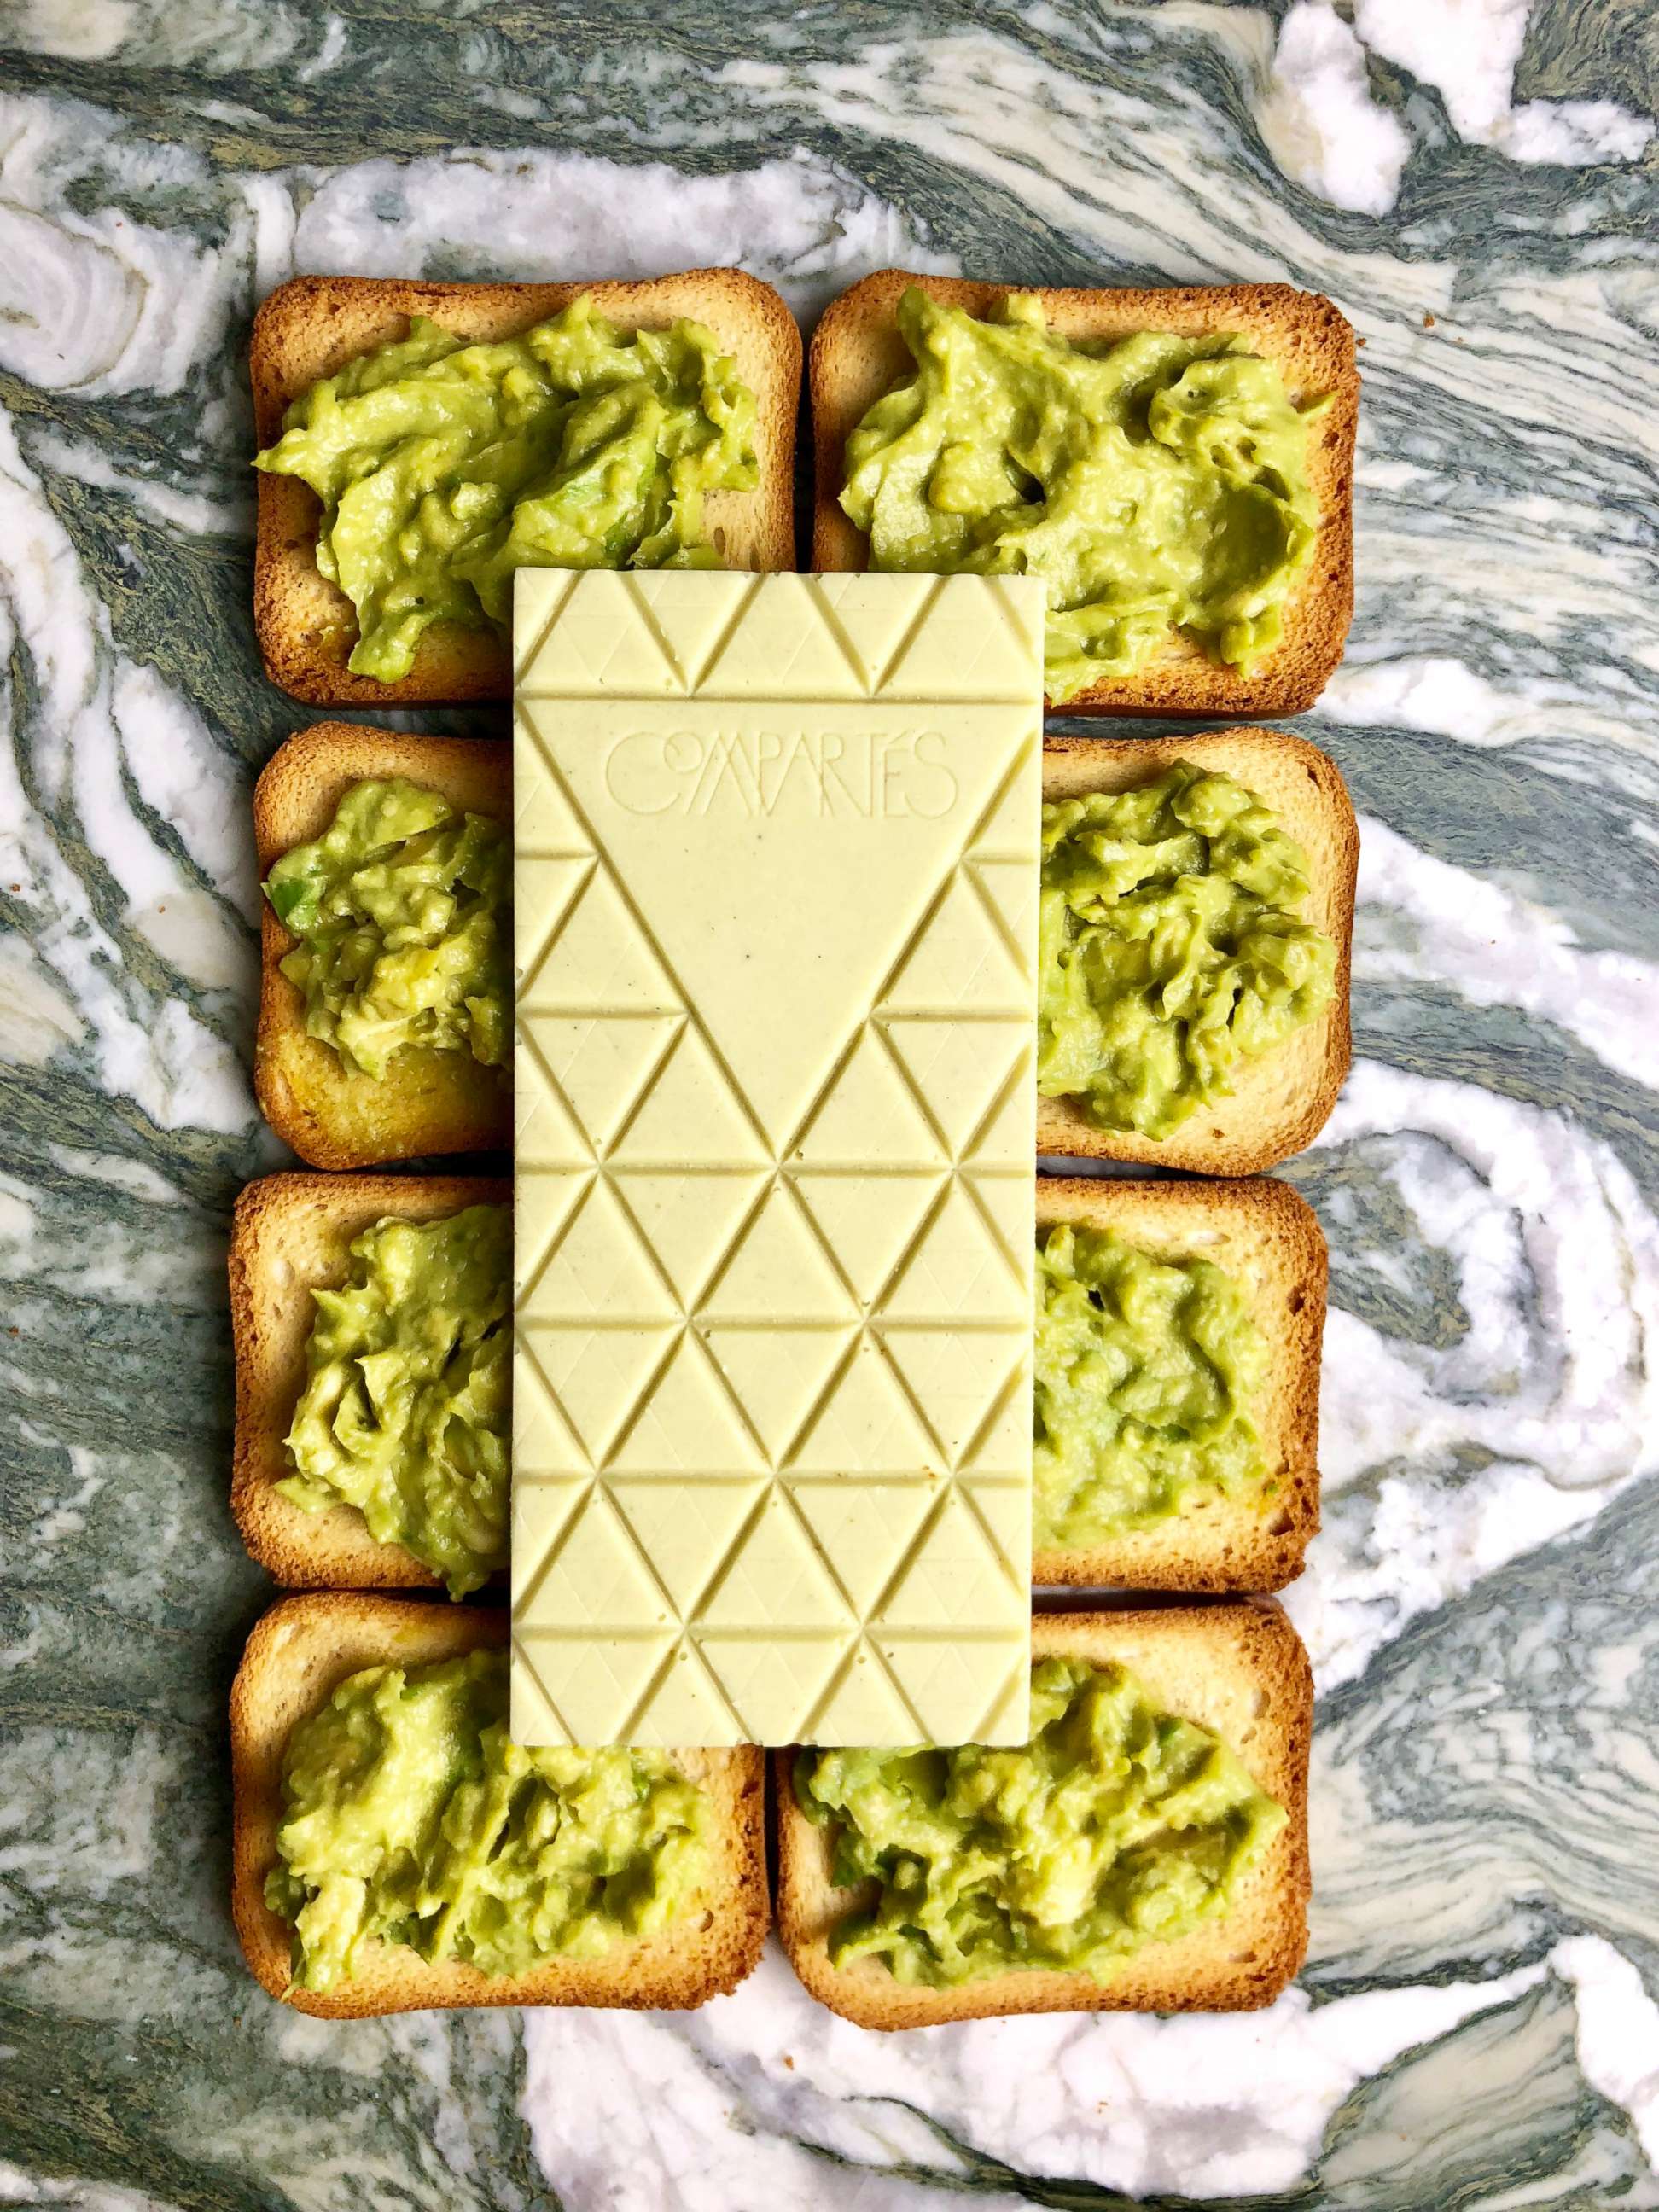 PHOTO: Compartes' avocado toast chocolate bars are photographed here.